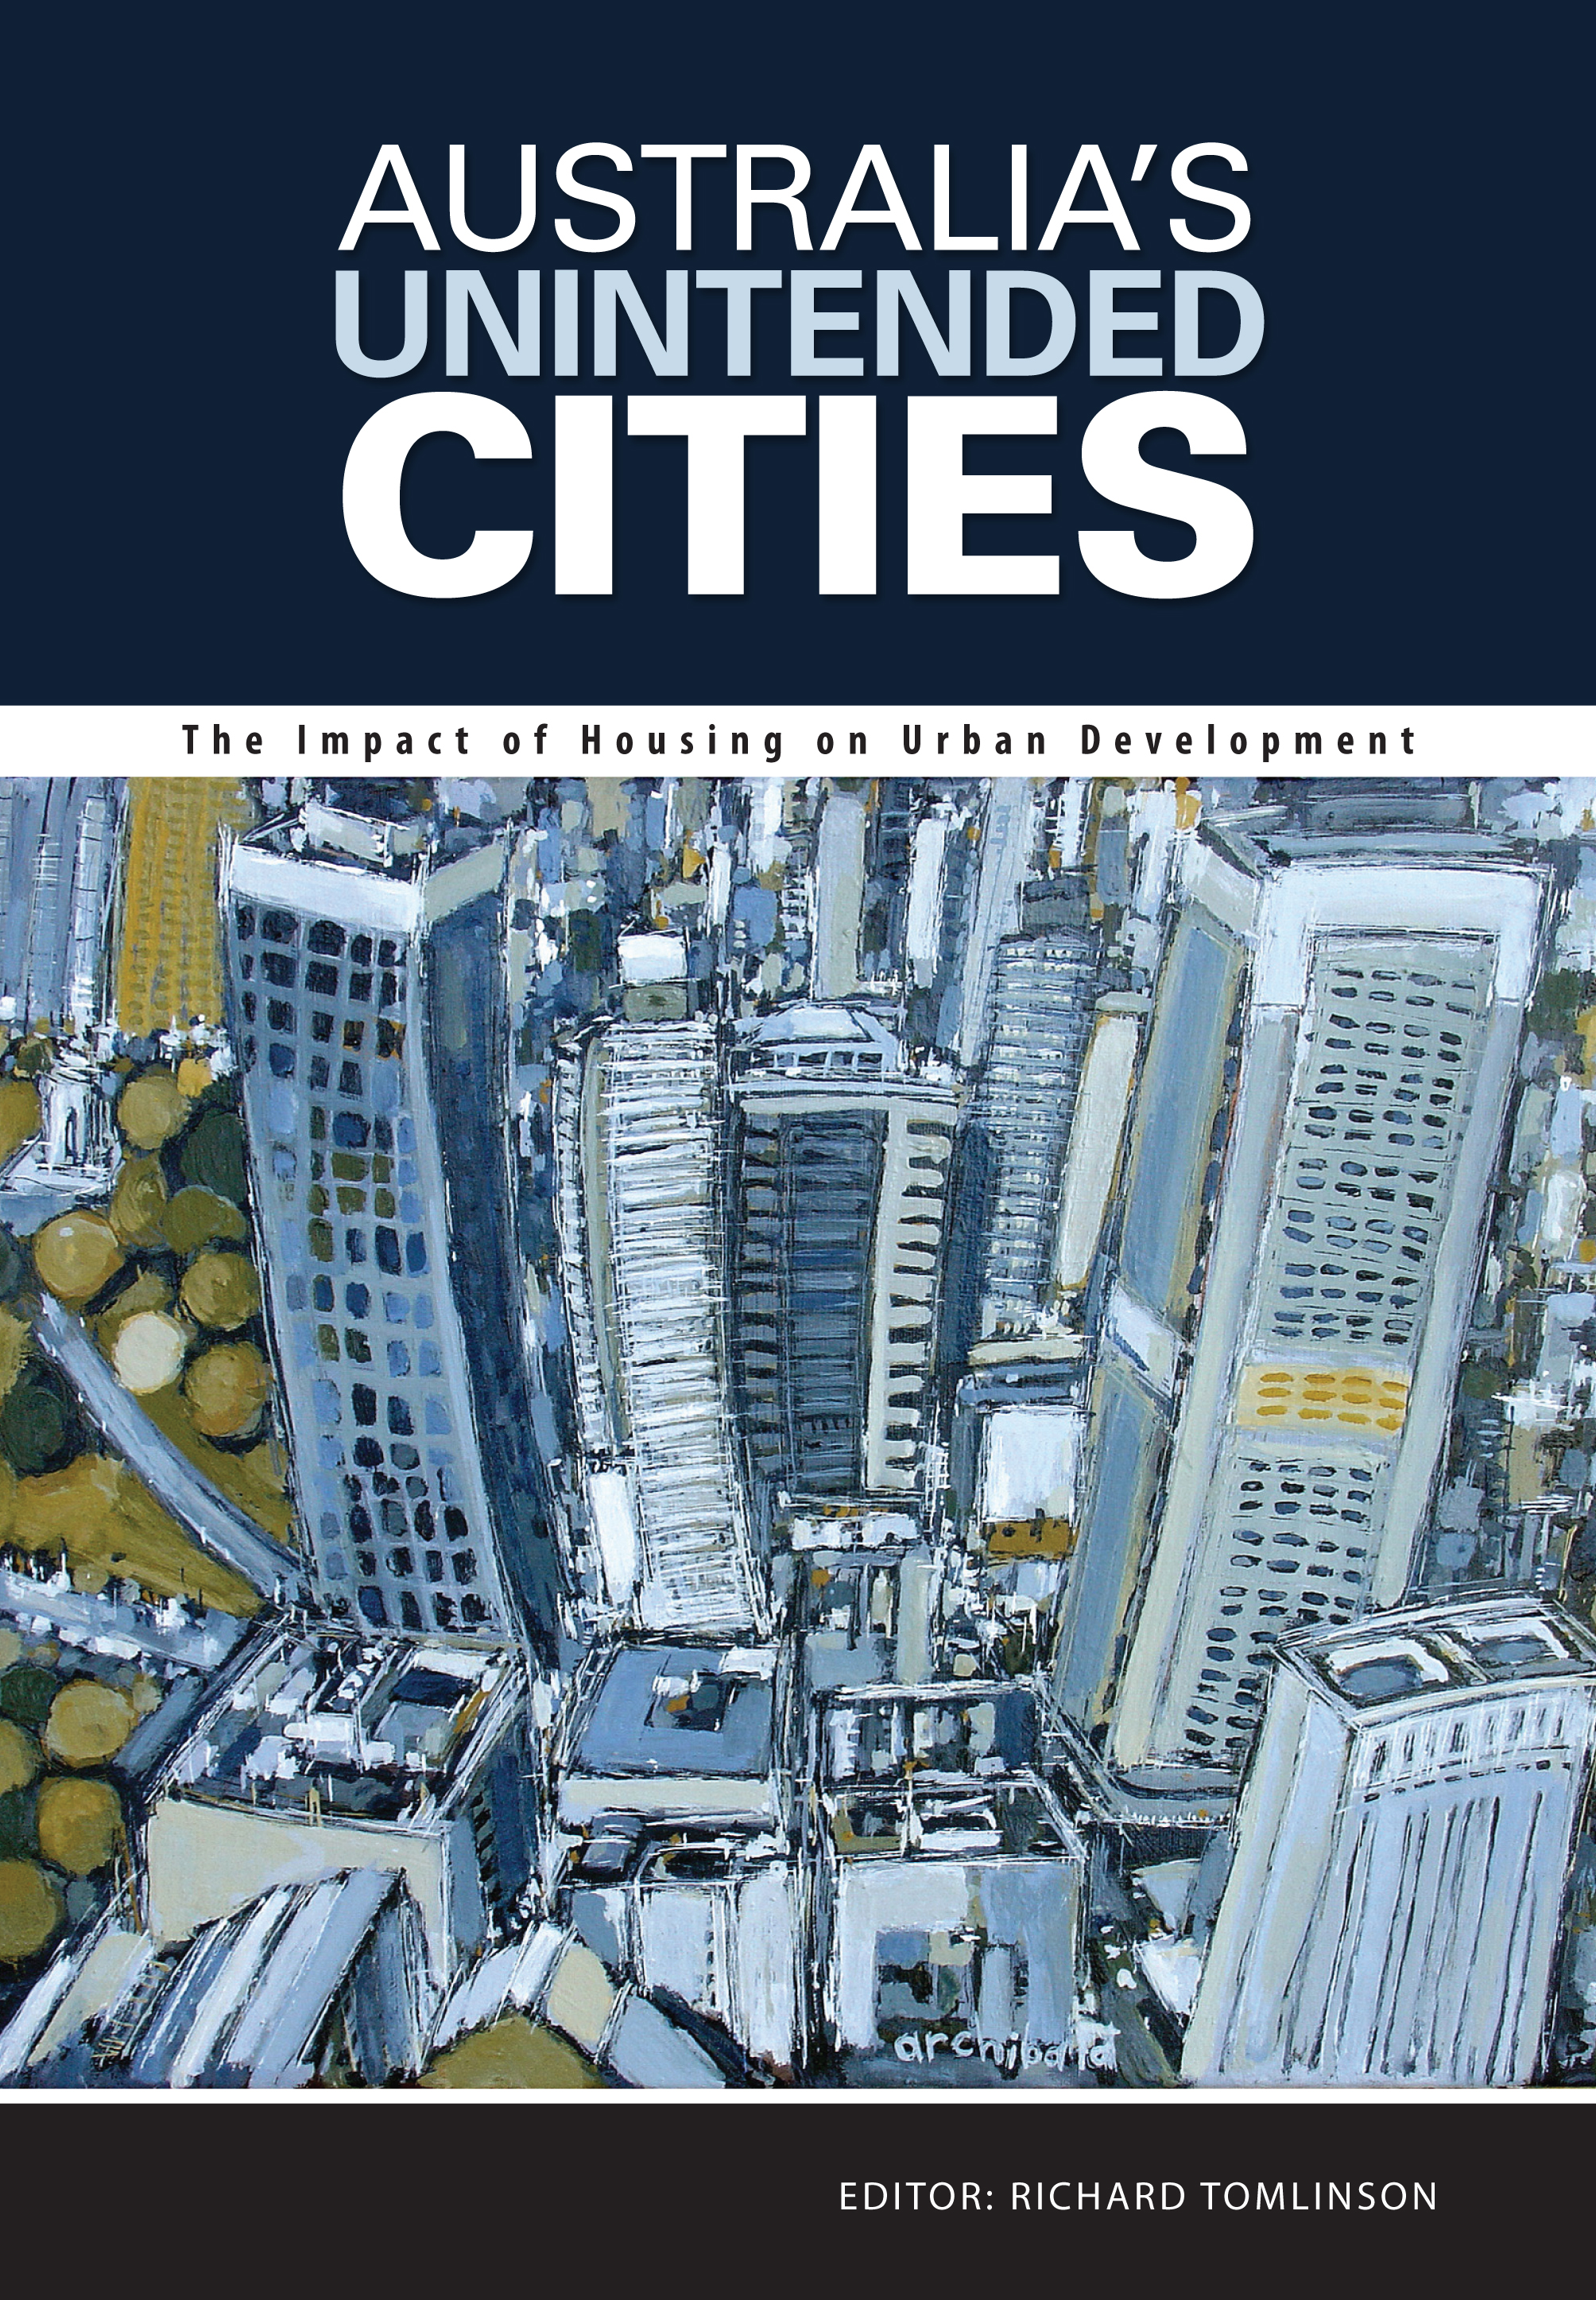 The cover image of Australia's Unintended Cities, features an illustrated arial view of a city scape with sky scrapers and parks.